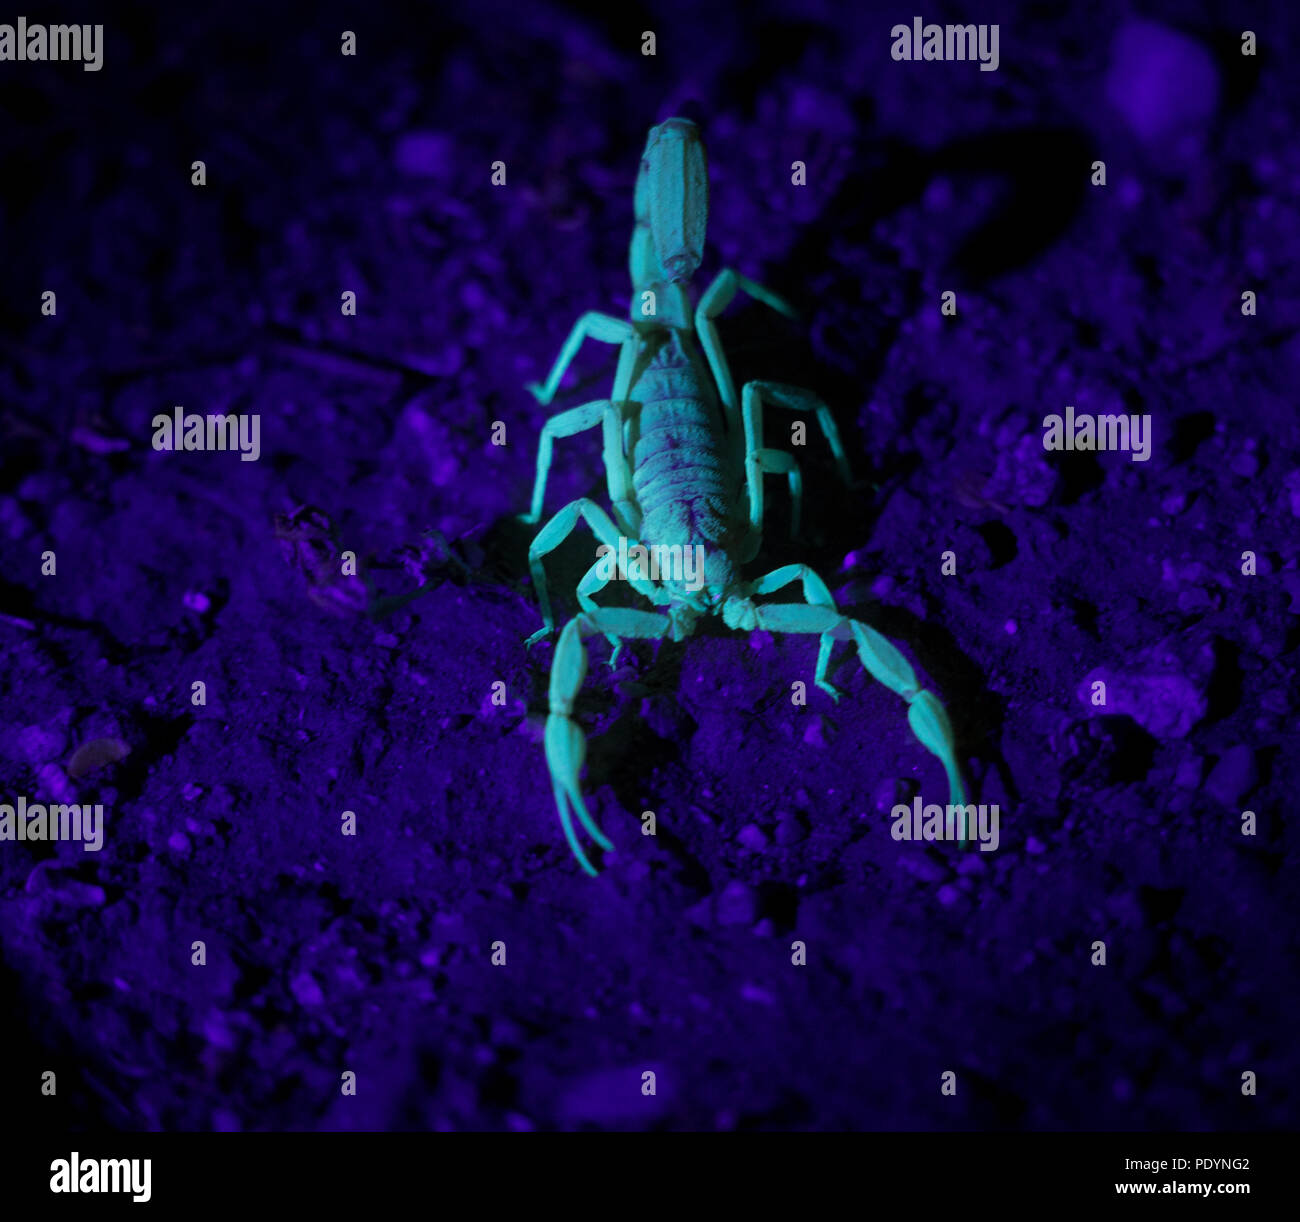 Scorpion in the Dark. Glowing insect and common bug of the desert. Small but deadly poisonous Scorpion. Stock Photo